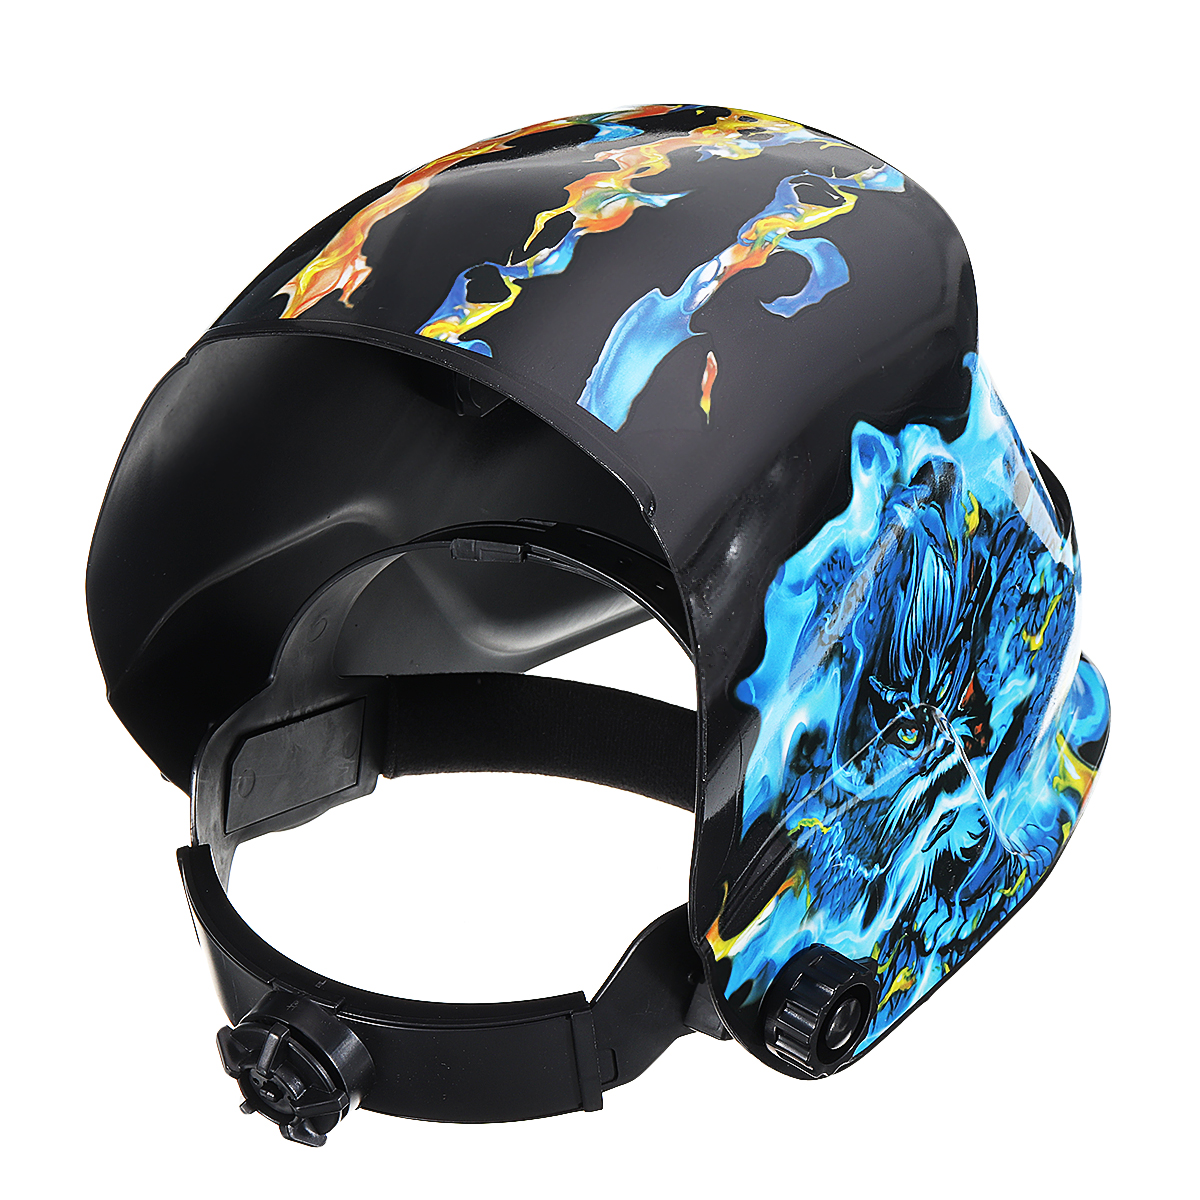 Electric-Auto-Darkening-Shield-Mask-Face-Protection-Big-View-Professional-Cap-Dimming-Solar-Power-Ad-1559030-3